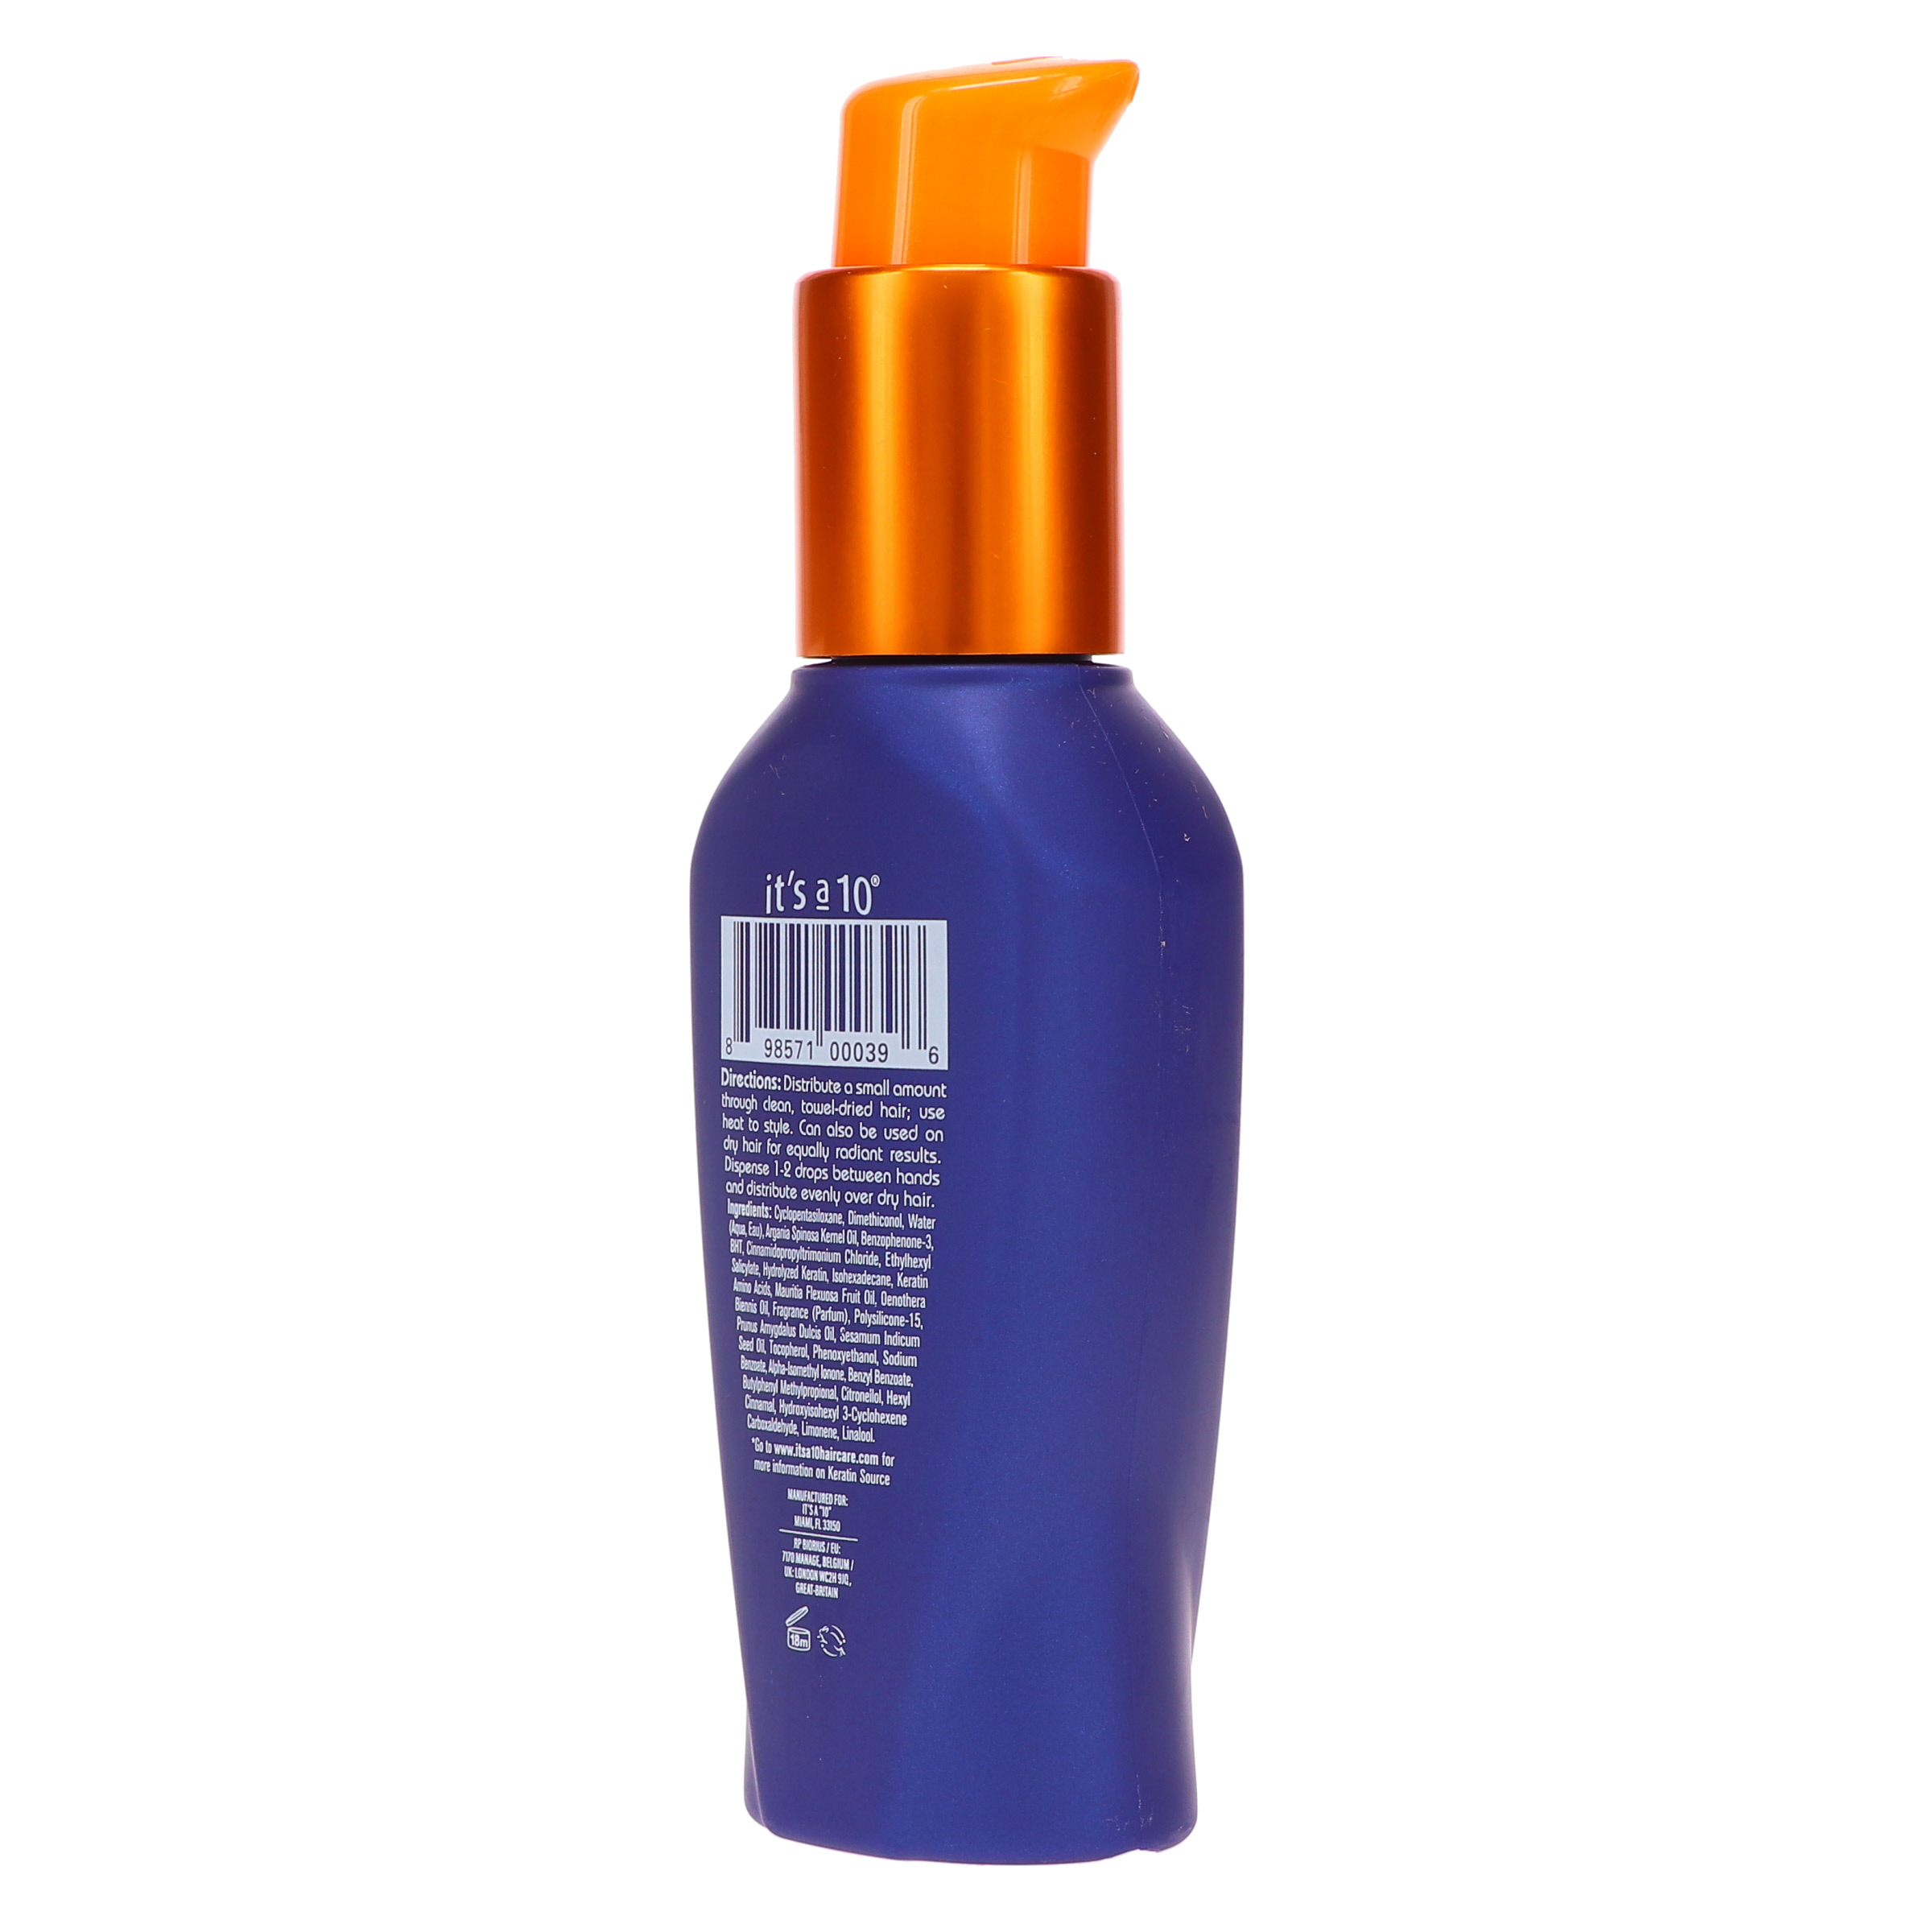 It's a 10 Miracle Oil Plus Keratin 3 oz - image 2 of 8